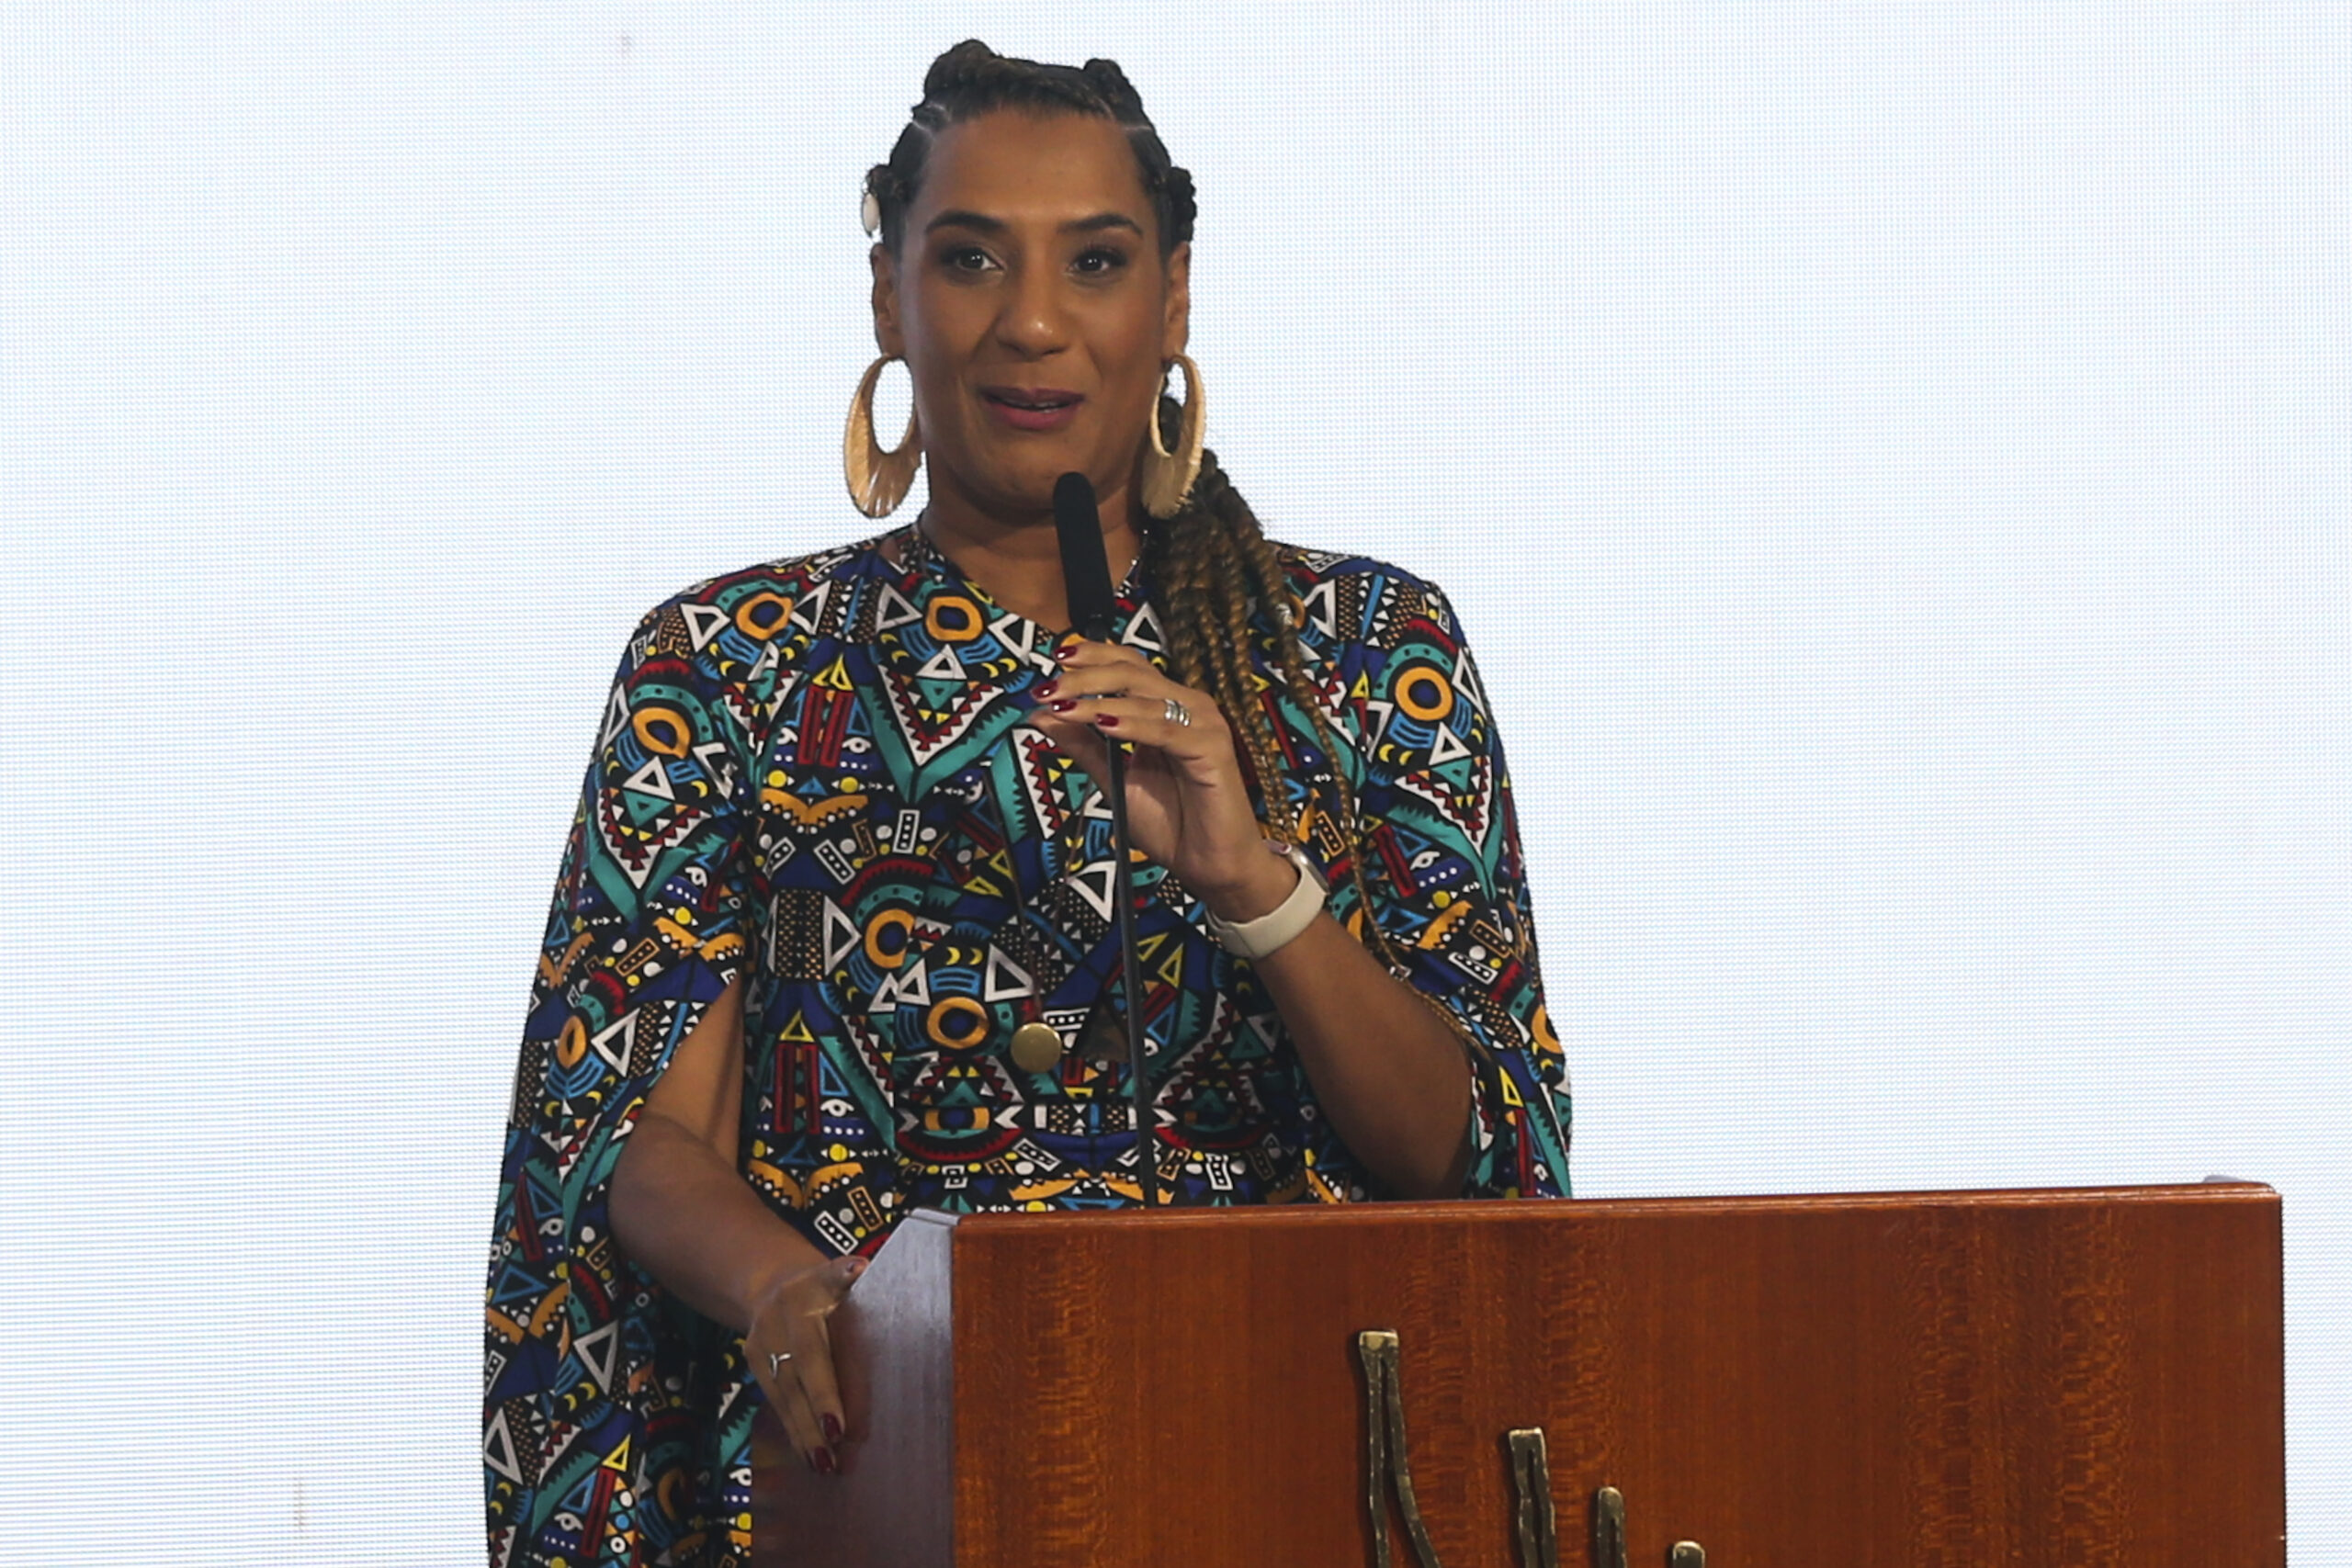 Anielle Franco speaks at her inauguration as Brazil's Minister of Racial Equality. Photo: Valter Campanato/Agência Brasil